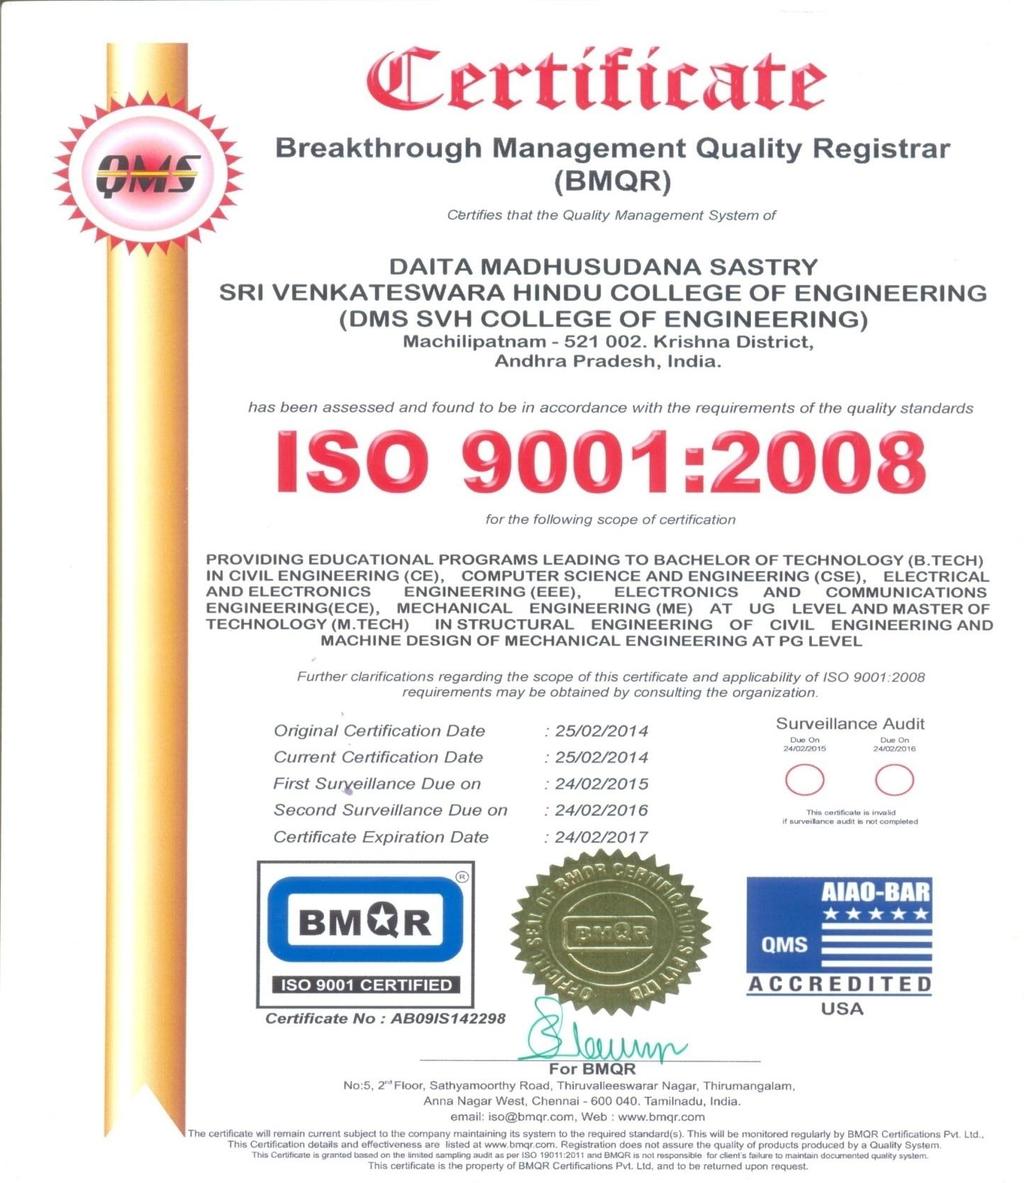 Annexure-X (ISO Certification) DMS SVH